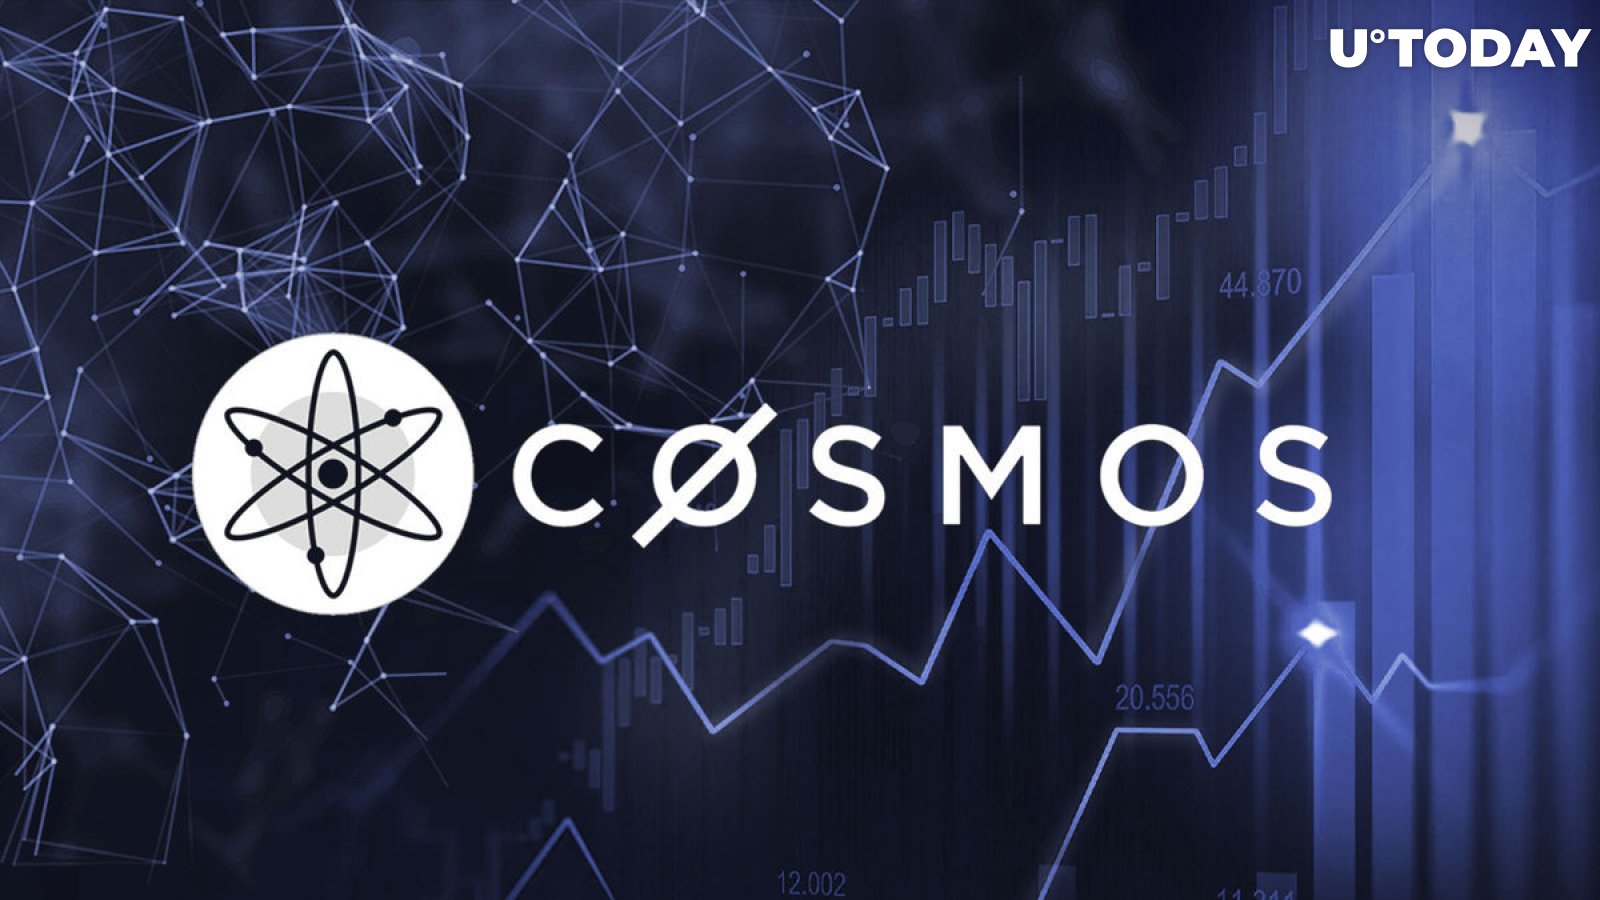 Cosmos (ATOM) Price May Go Parabolic If This Signal Is Obeyed